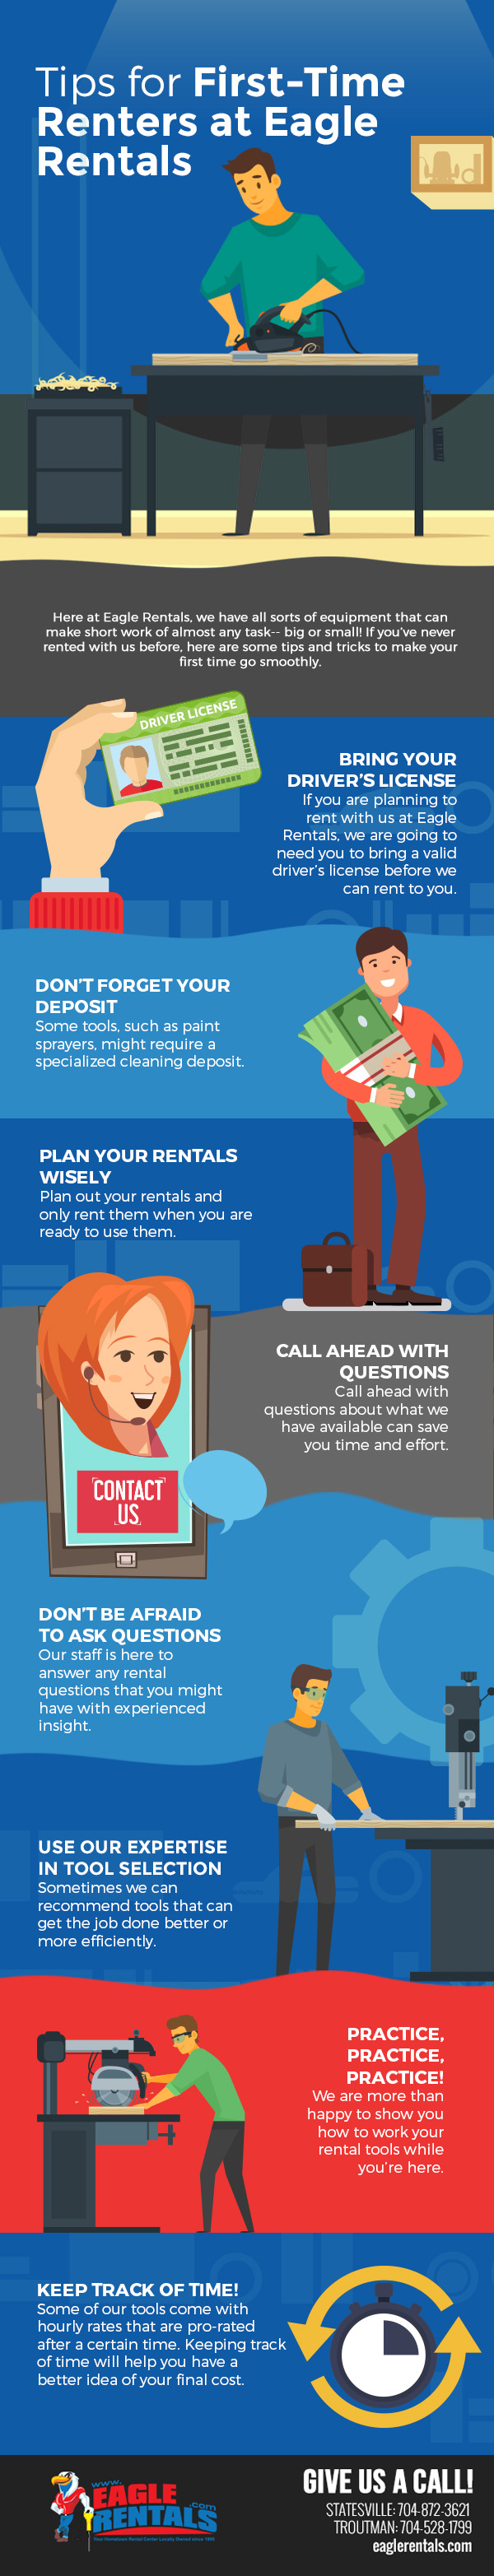 Tips for First-Time Renters at Eagle Rentals [infographic]